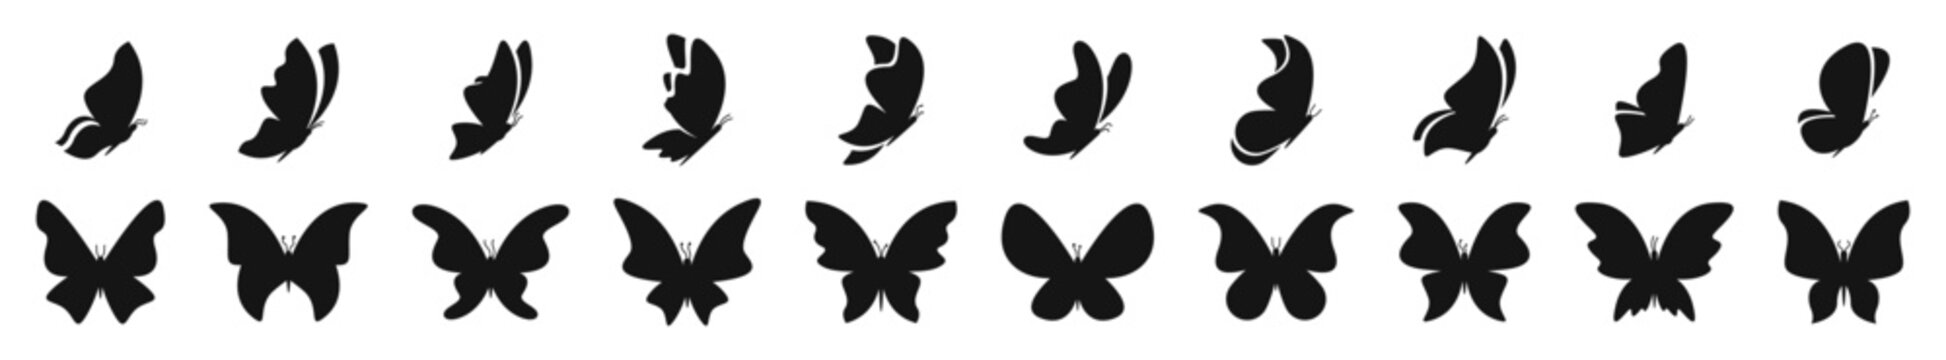 Butterfly silhouette collection. Flying butterflies set. Silhouette style vector icons.